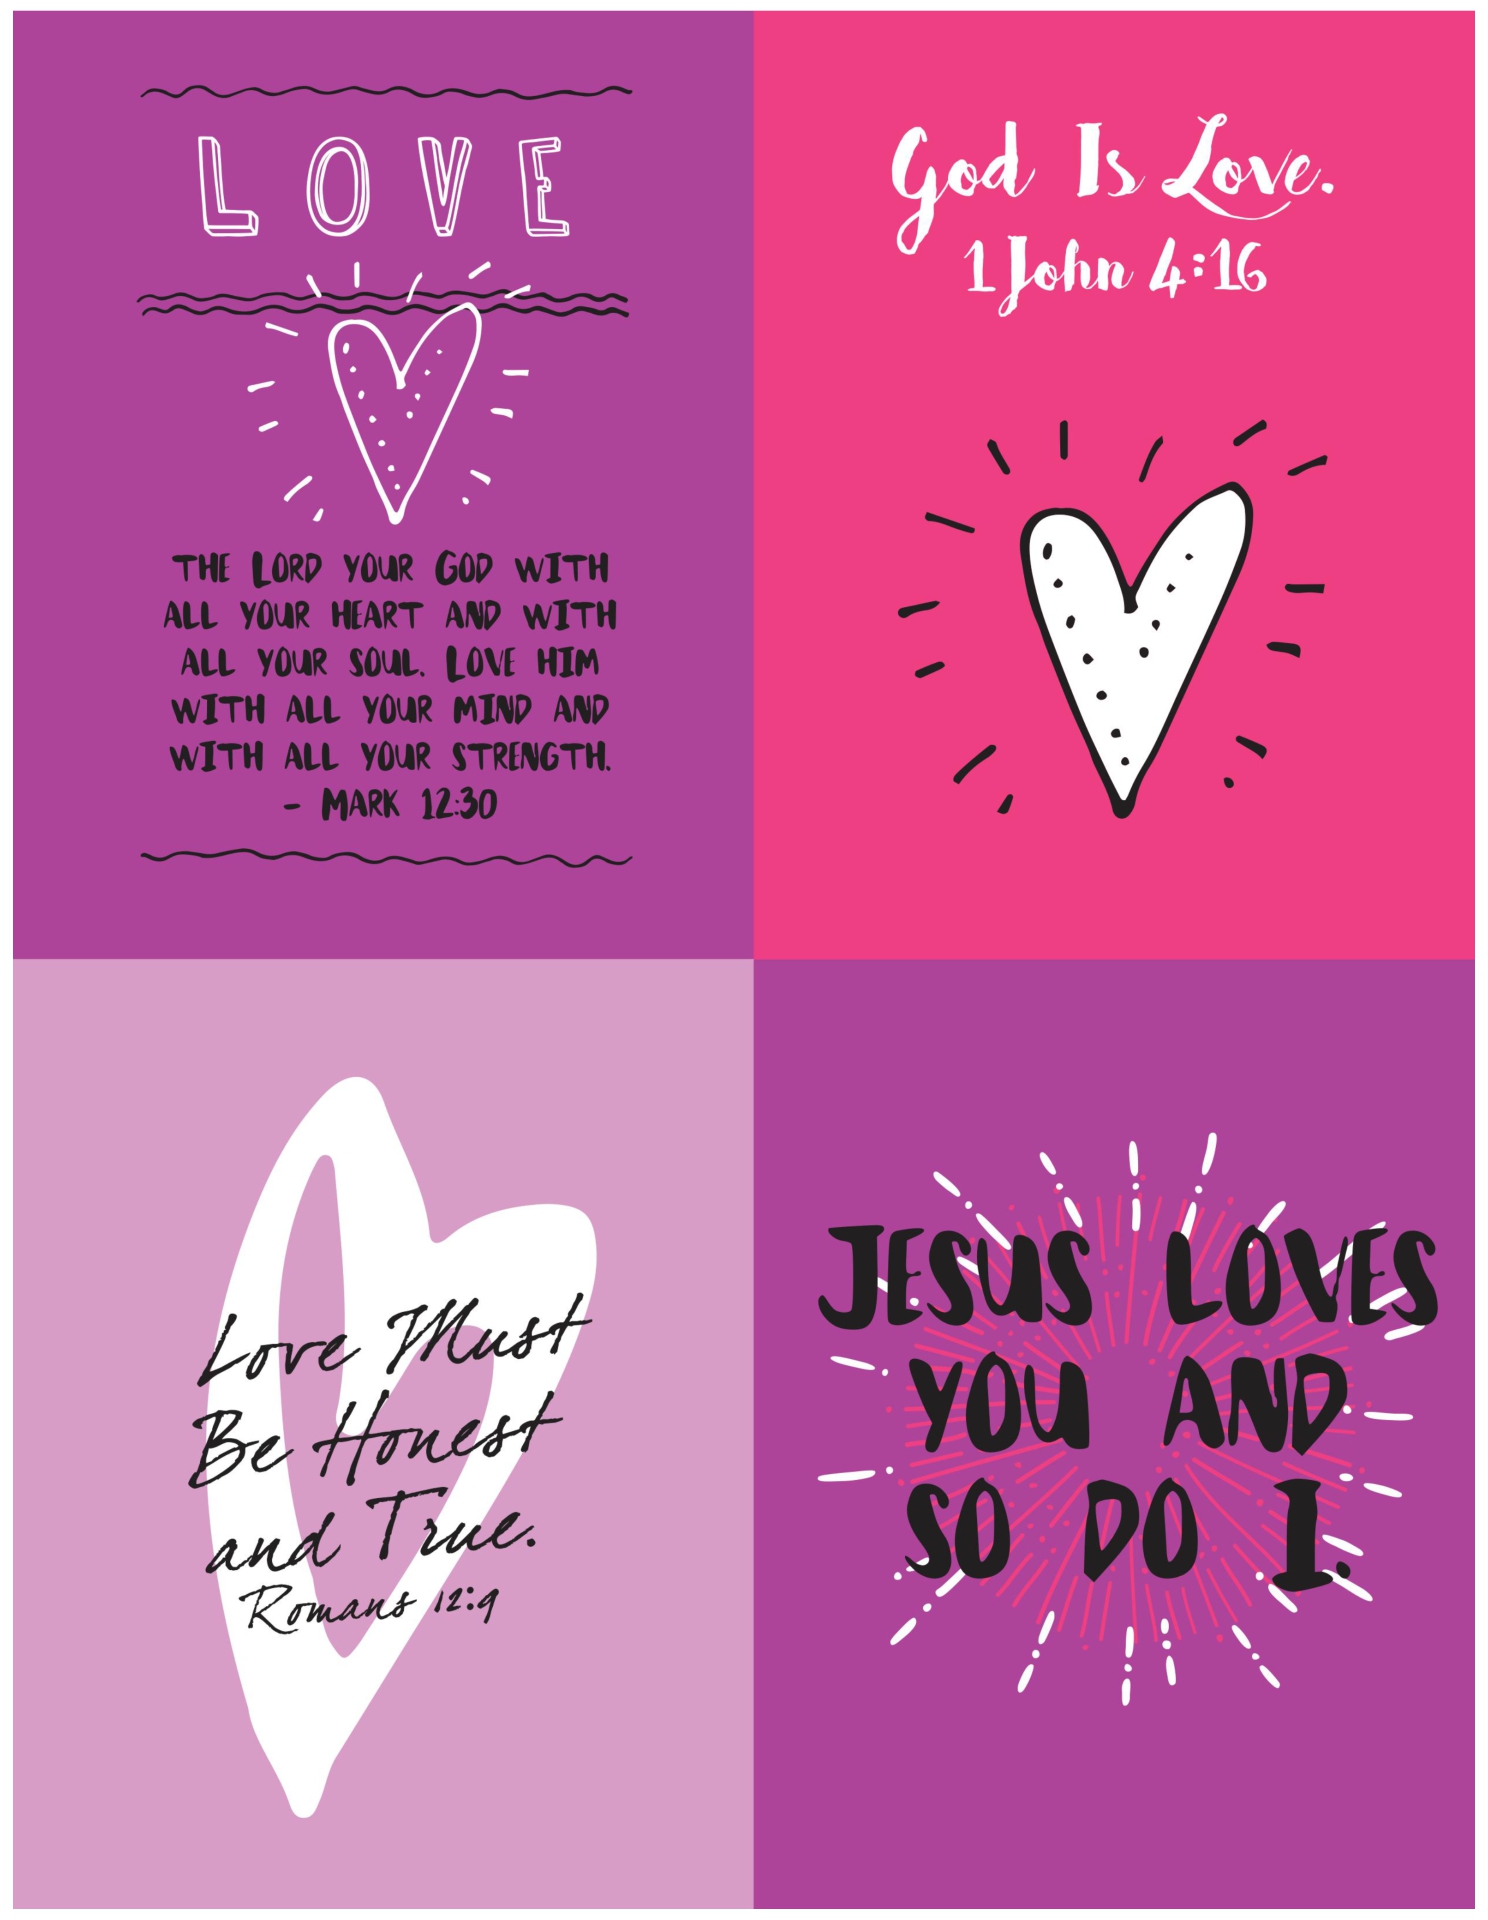 freeprintablechristianvalentinecards with images christian - 10 best ...